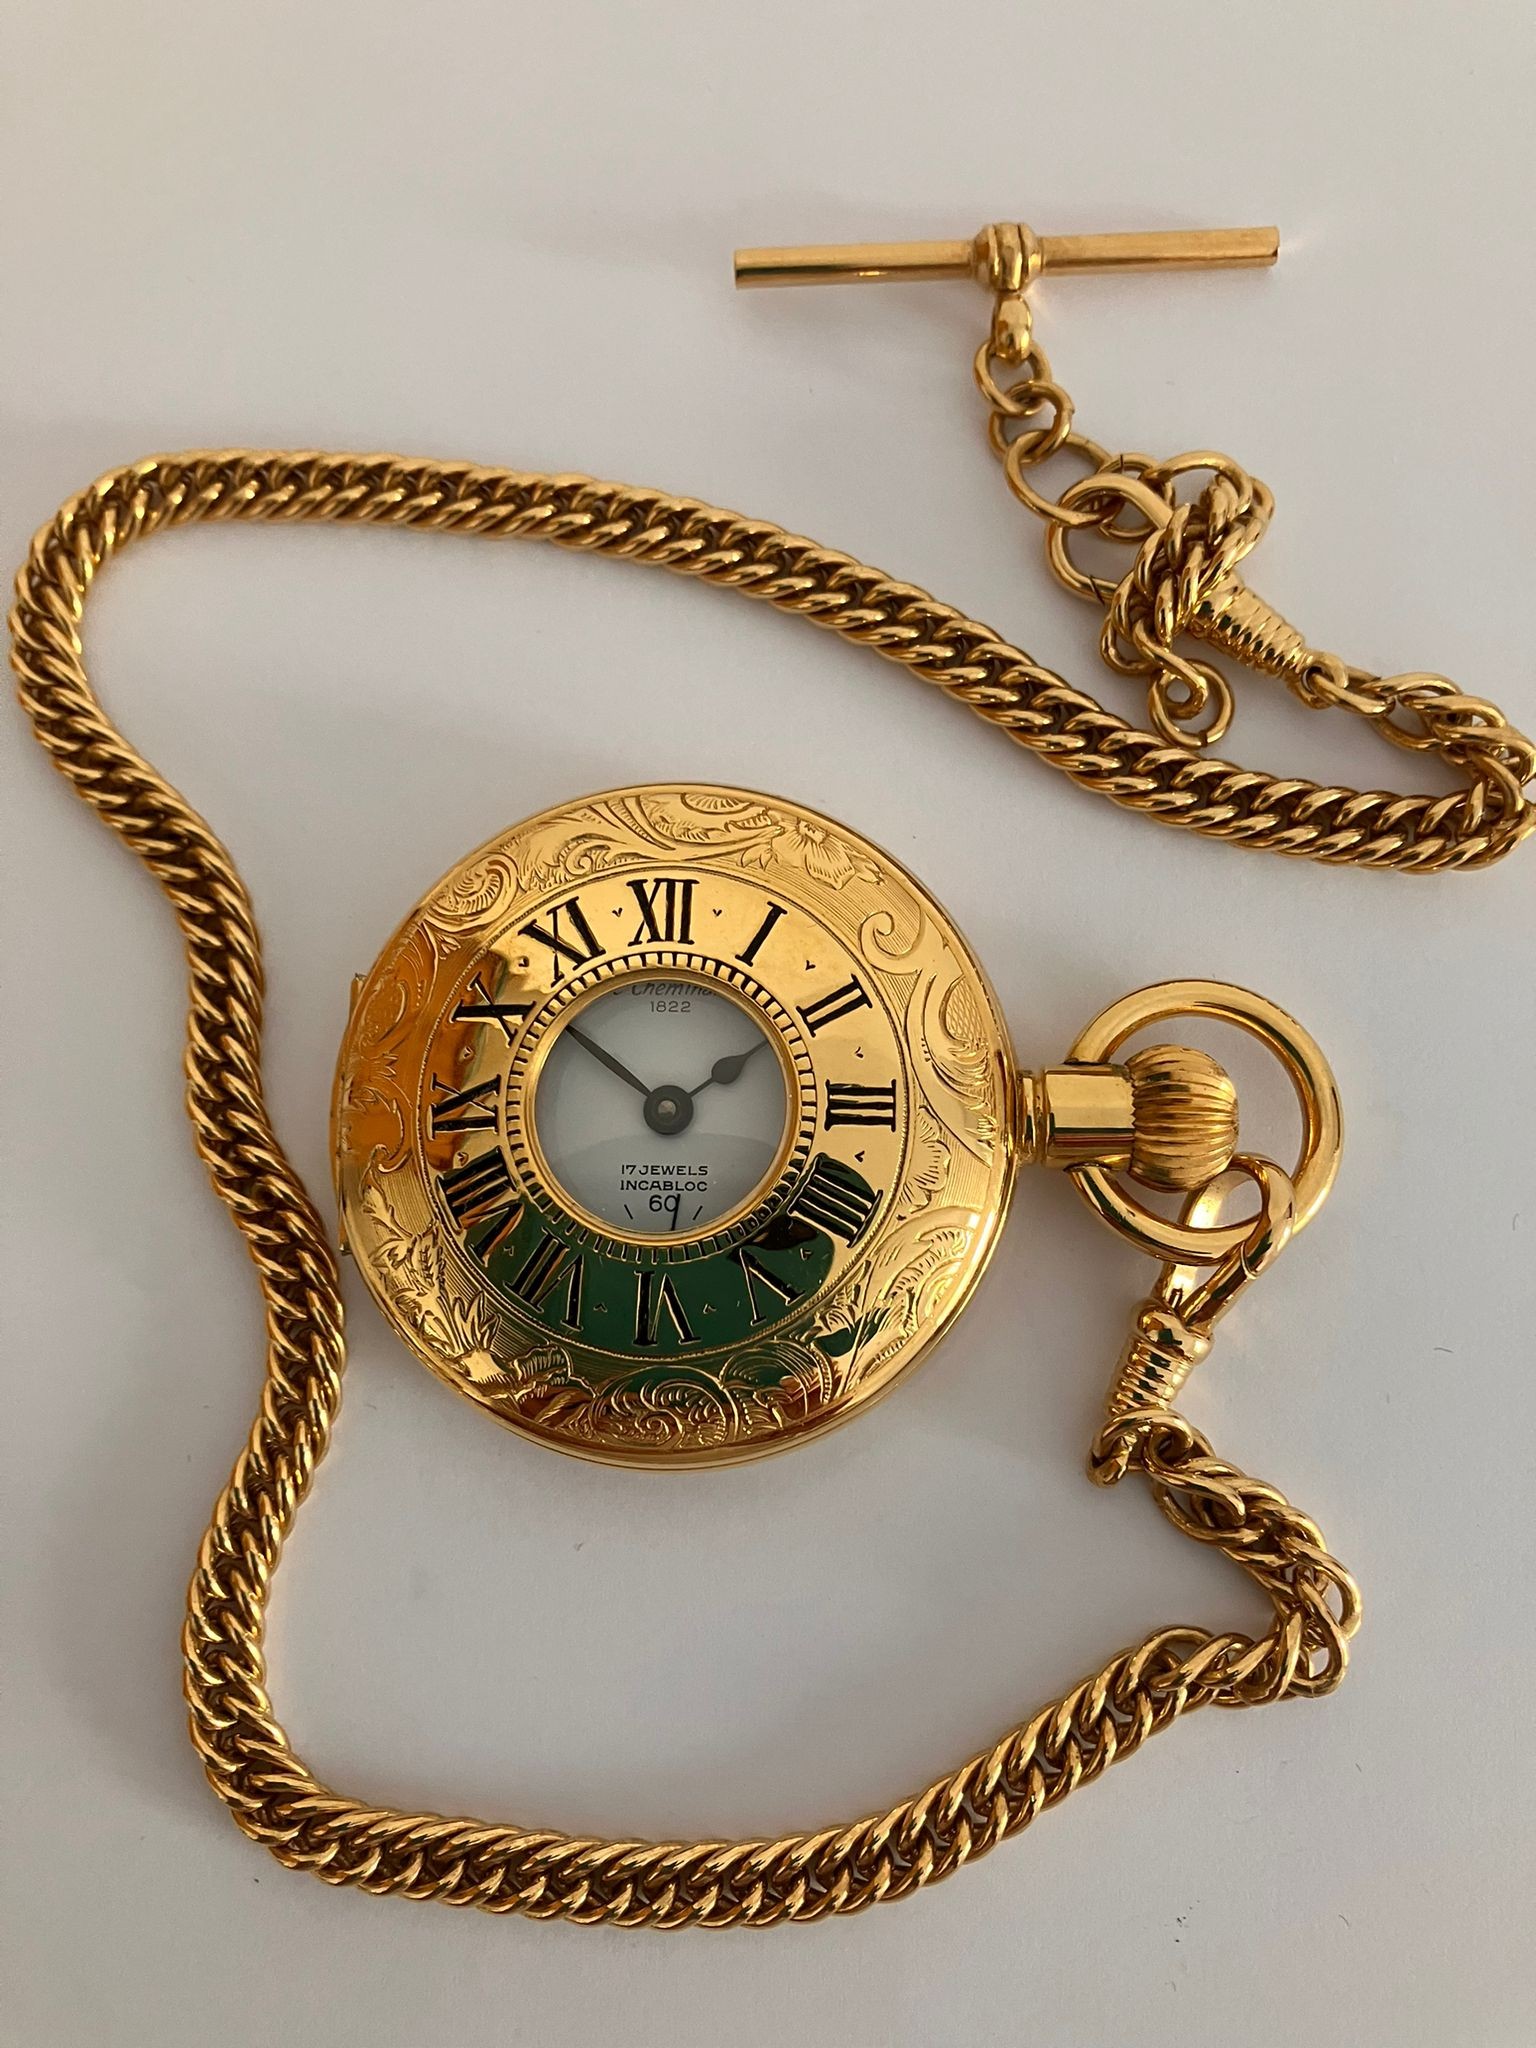 Le CHEMINANT Gilded HALF HUNTER POCKET WATCH.Having gilded chain with clasp and T-bar. Manual